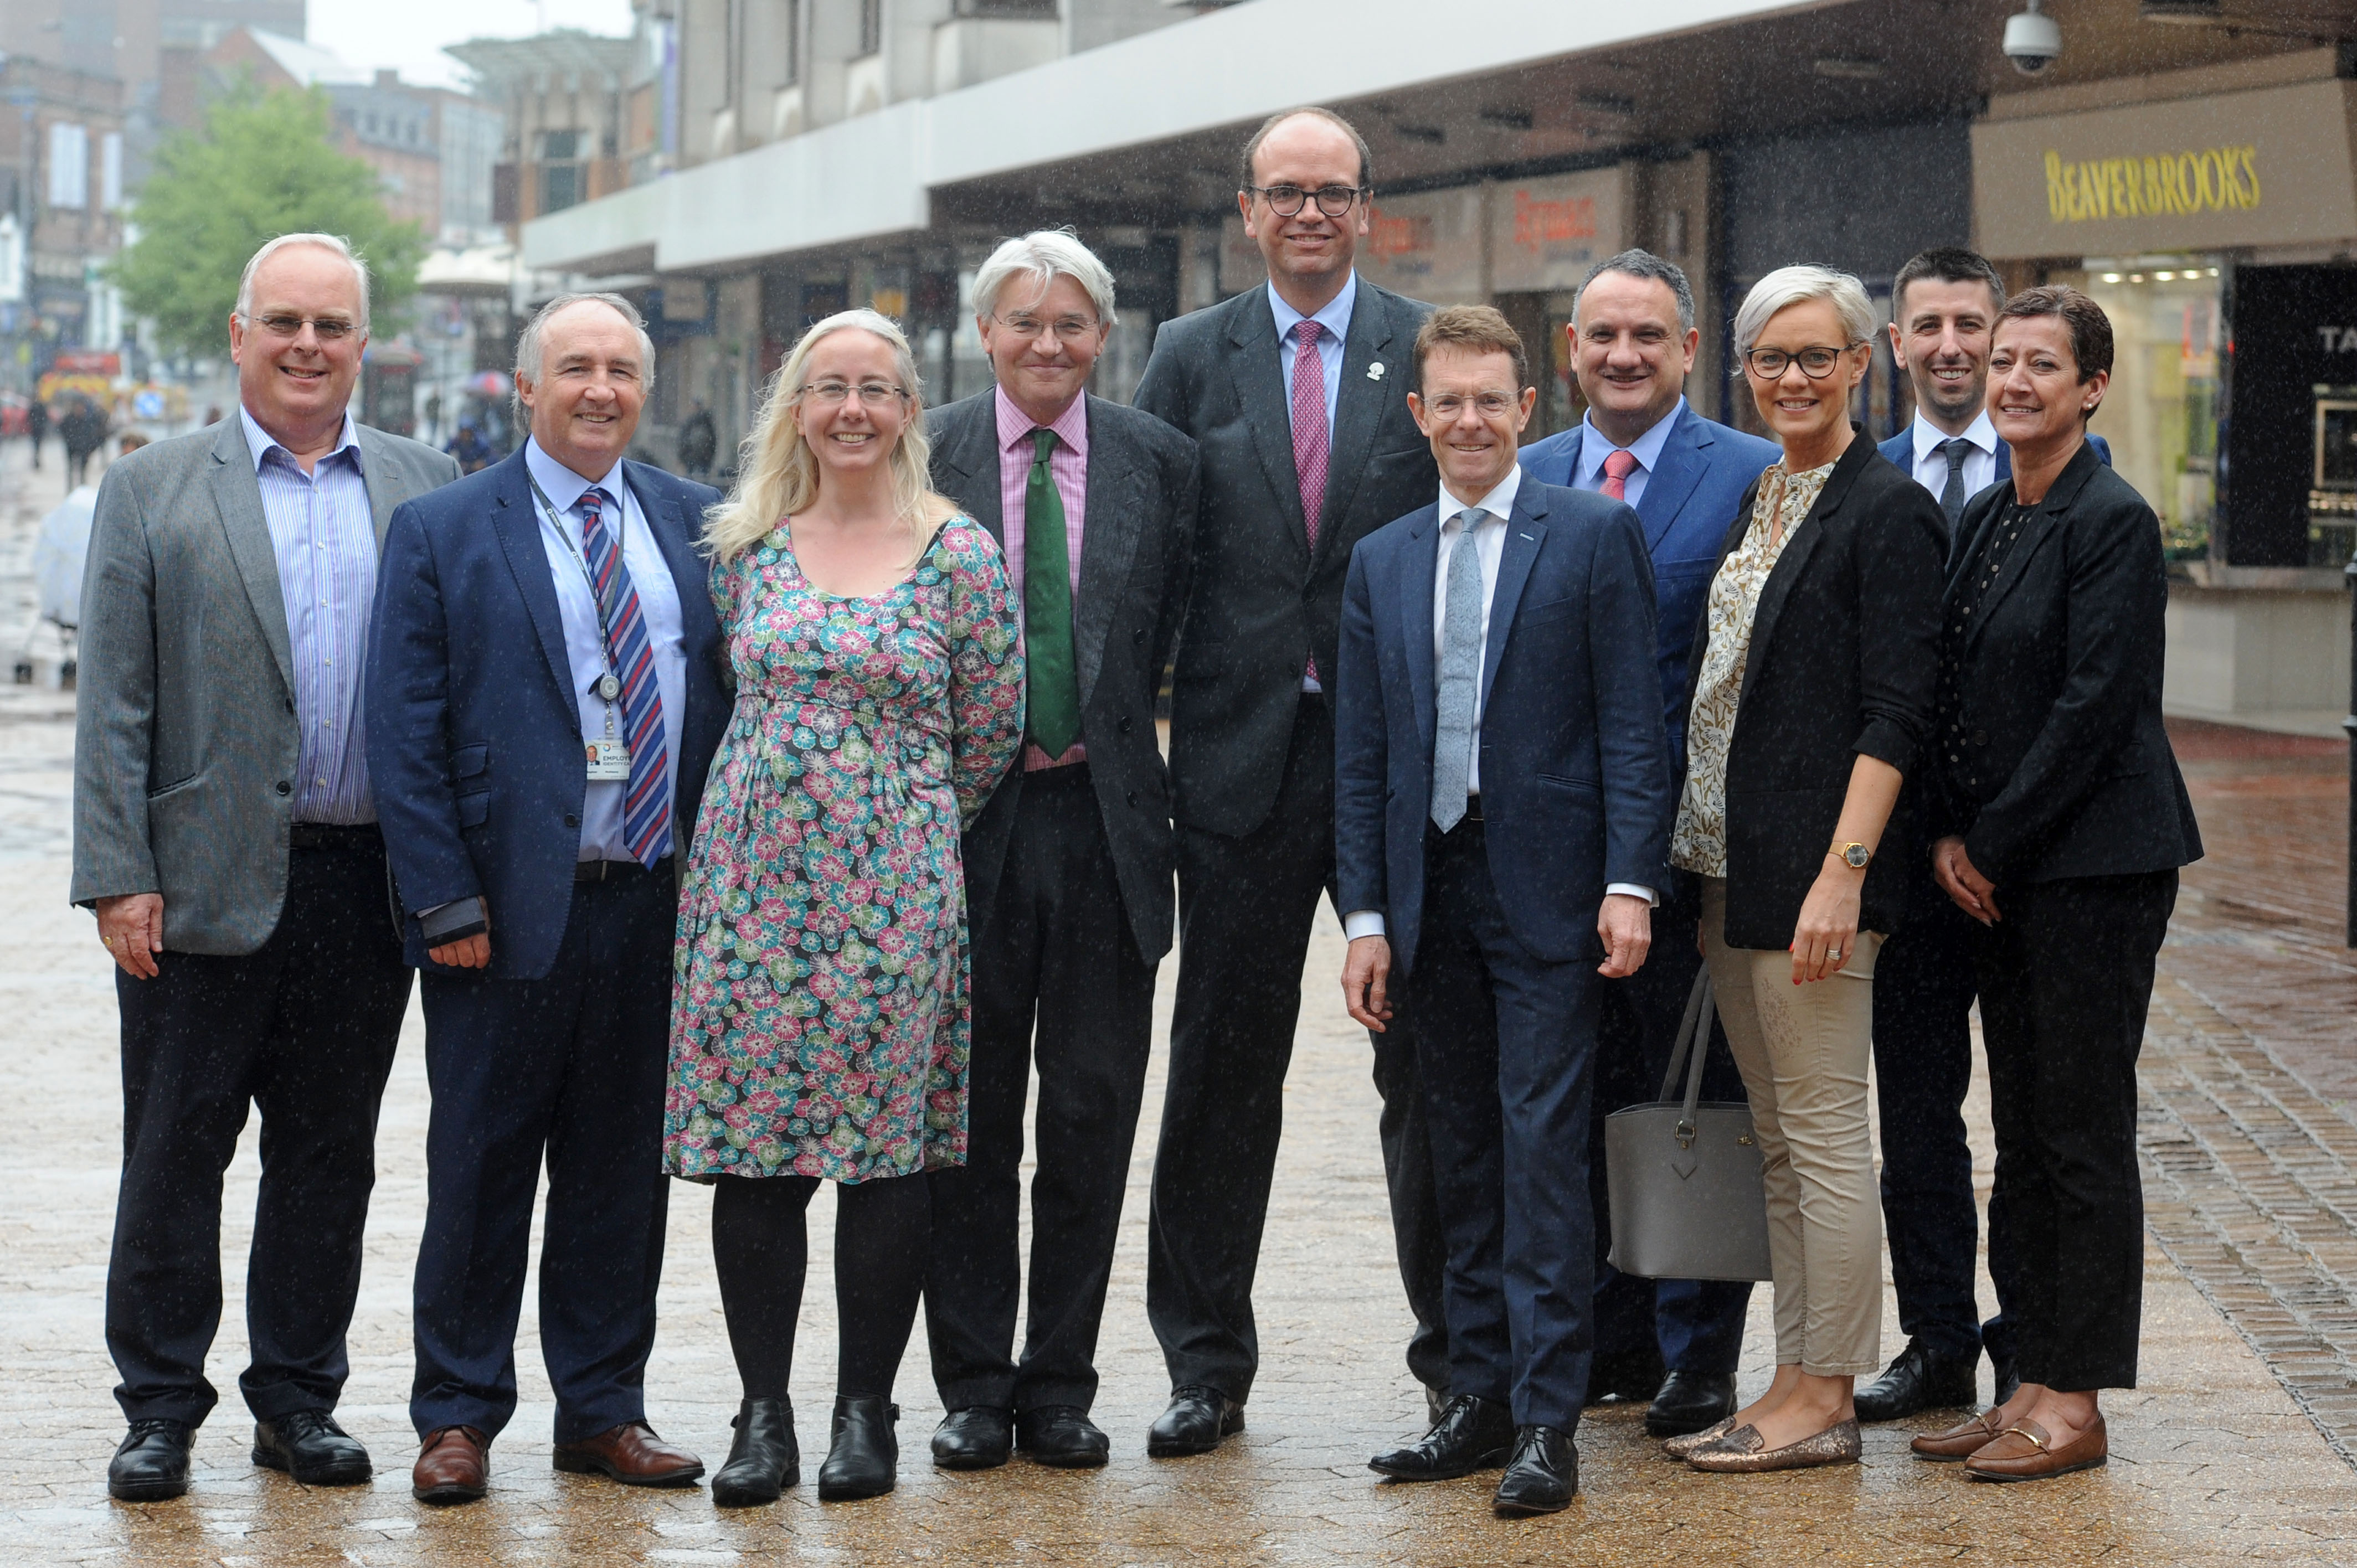 From left to right: Mike Bushell, Sutton Coldfield BID, Steve McAleavy, TfWM, Zoe Toft, Folio, Andrew Mitchell MP, Cllr Simon Ward, Royal Sutton Coldfield Town Council, Andy Street, Mayor of the West Midlands, Stephen Roberts, Sutton Coldfield BID, Katie Hale, Sutton Coldfield Chamber of Commerce, Richard Cowell, Birmingham City Council and Shanaaz Carroll, Greater Birmingham and Solihull Local Enterprise Partnership